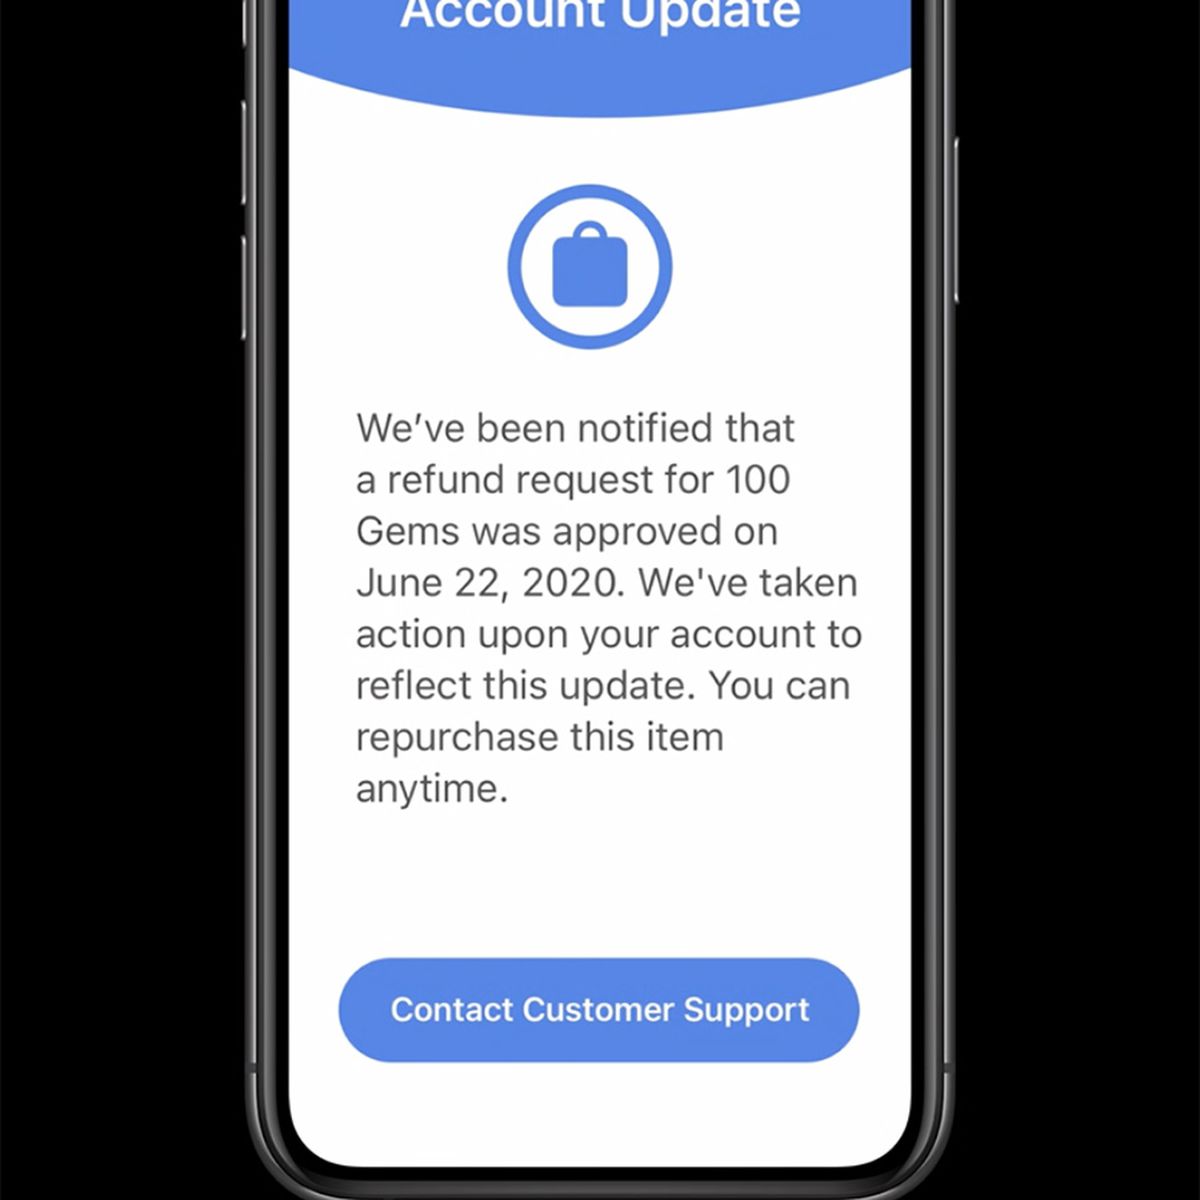 Request a refund for apps or content that you bought from Apple